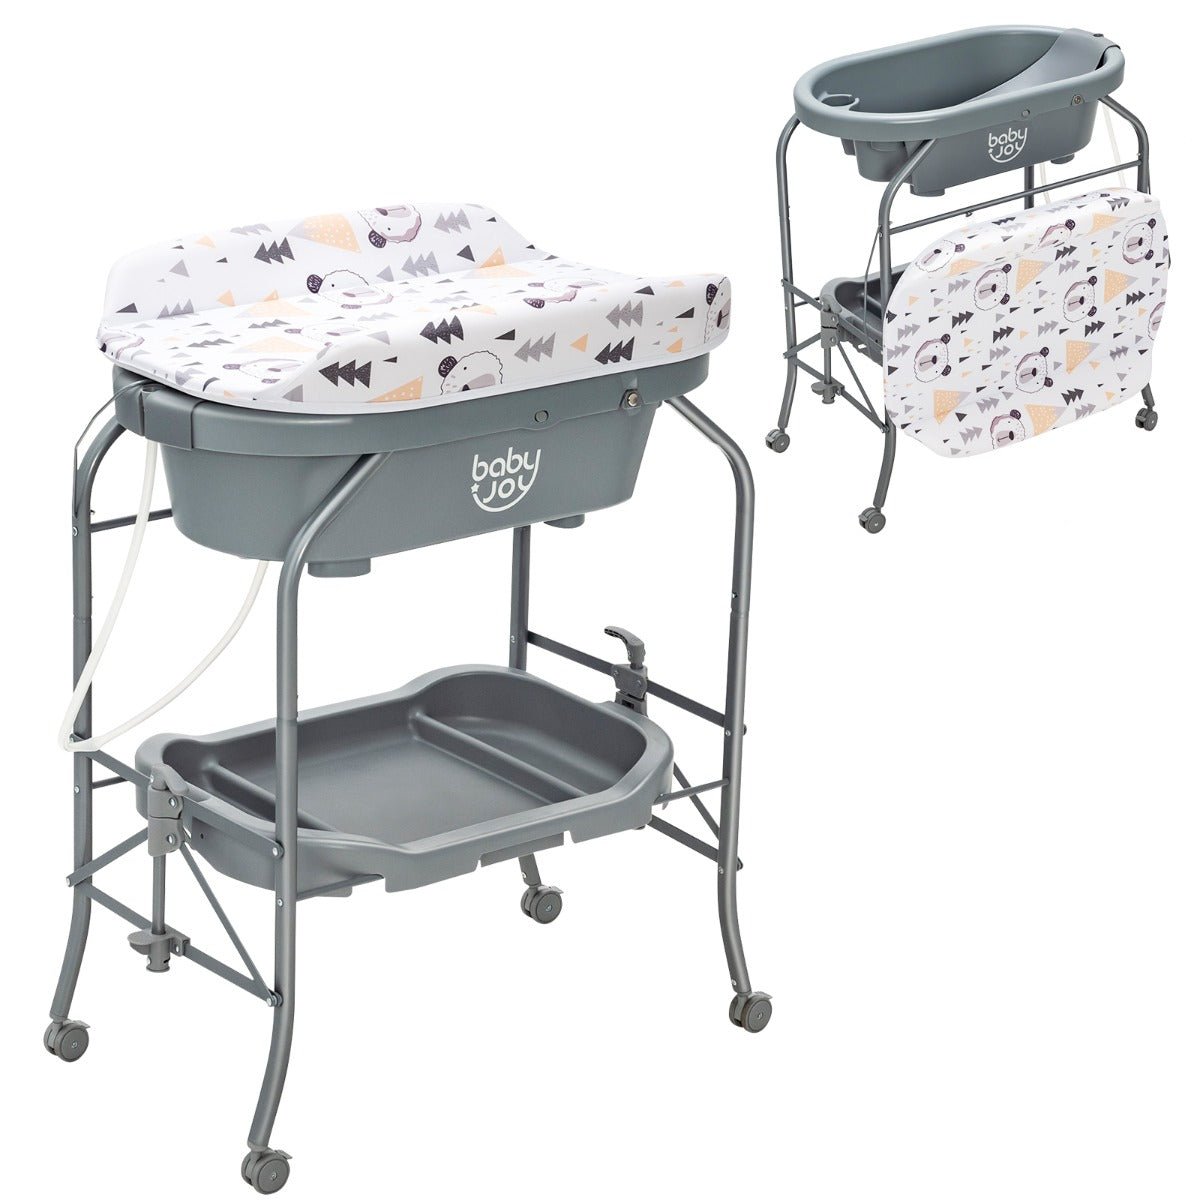 Shop Grey Portable Baby Changing Table with Bathtub and Waterproof Pad